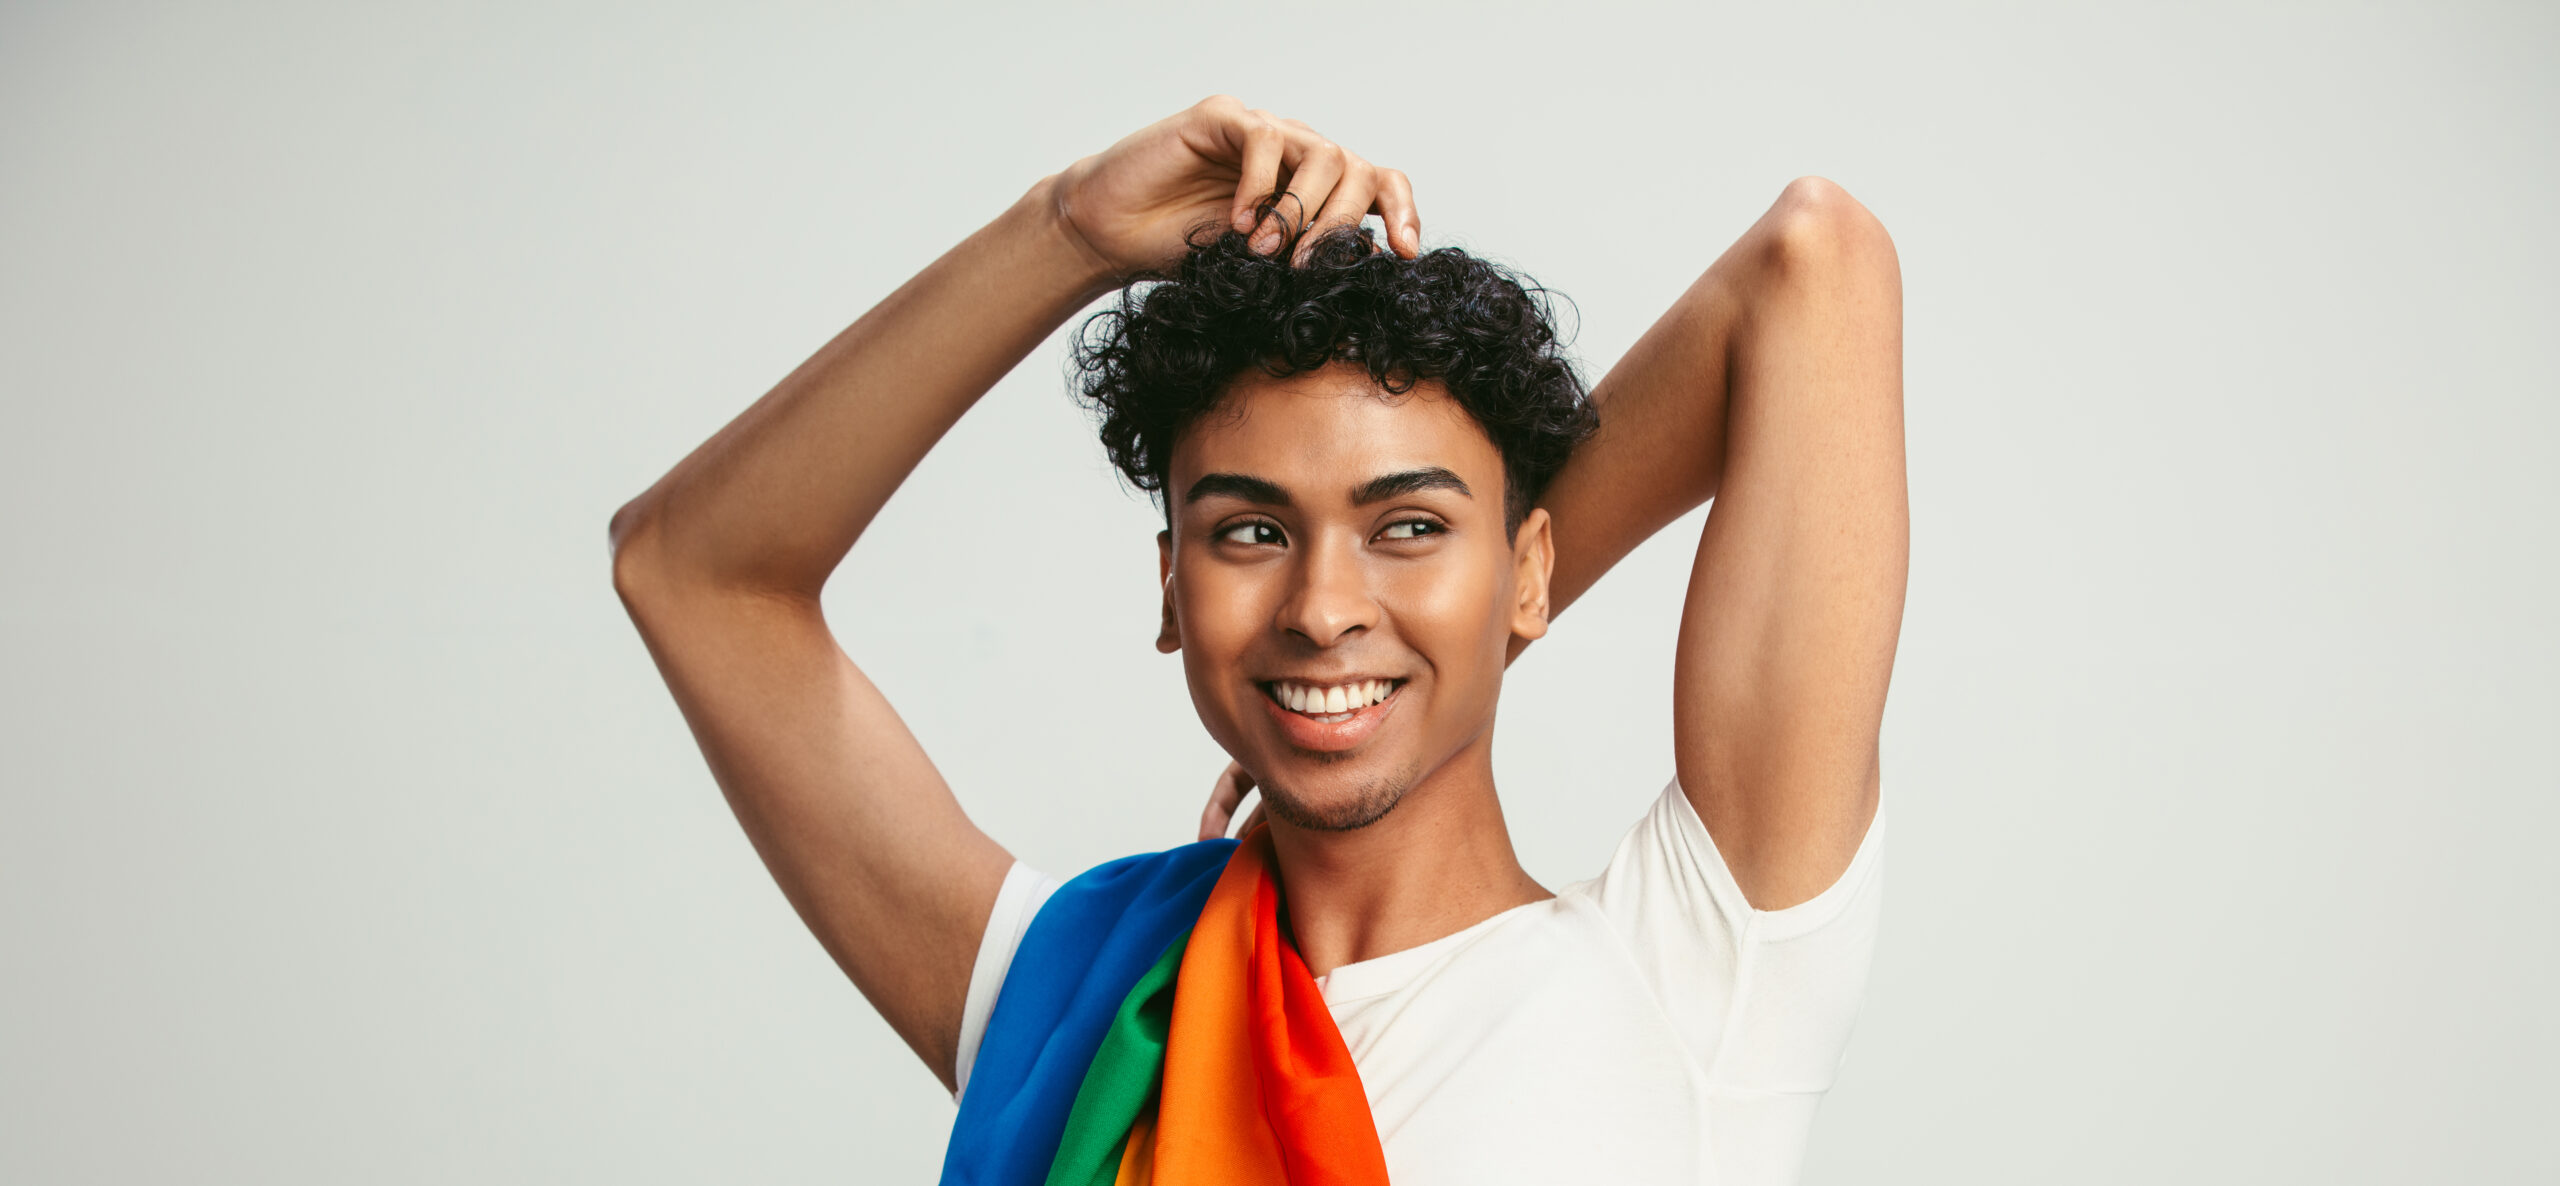 Smiling person with arms above head, curling black hair, weairing a white crop-top with a rainbow flag draped over their shoulder.